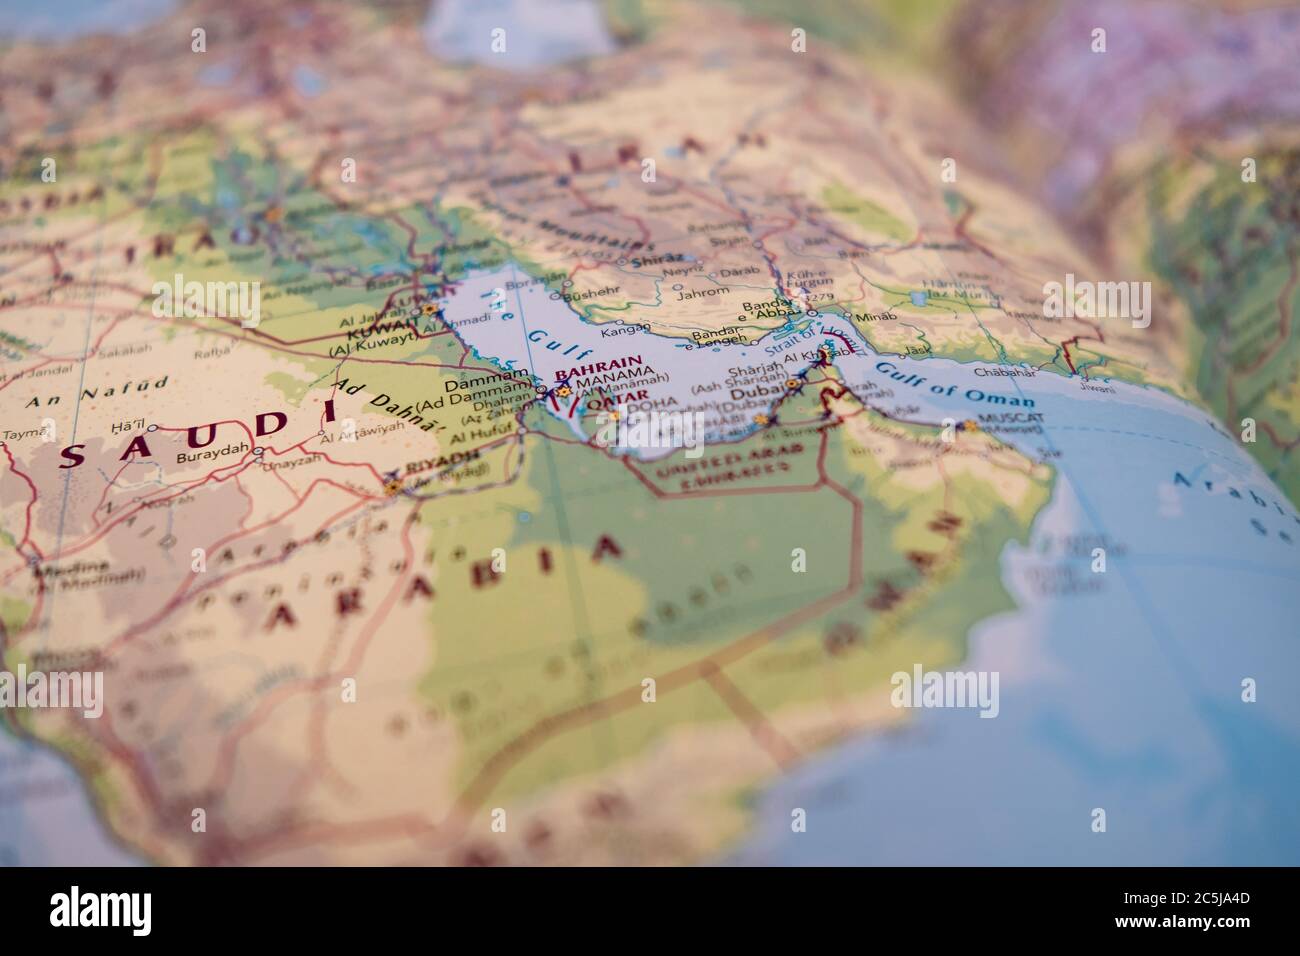 Shallow focus showing the Straight of Hormuz sensitive waterway located in the Persian gulf. Stock Photo